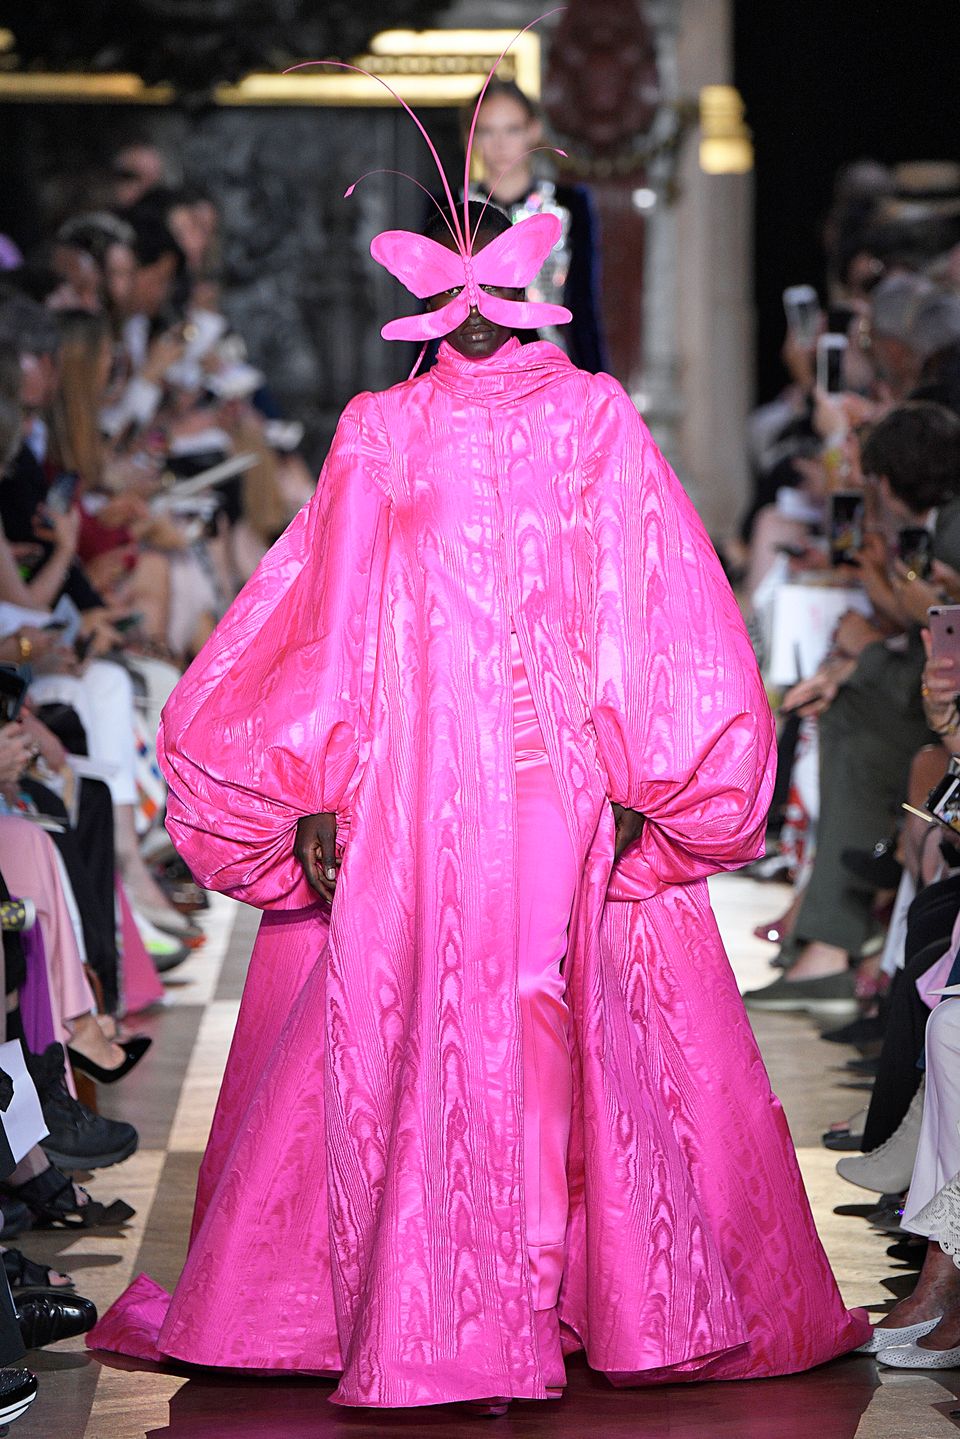 The 2019 Met Gala Is All About Camp. Here's What That Means. | HuffPost ...